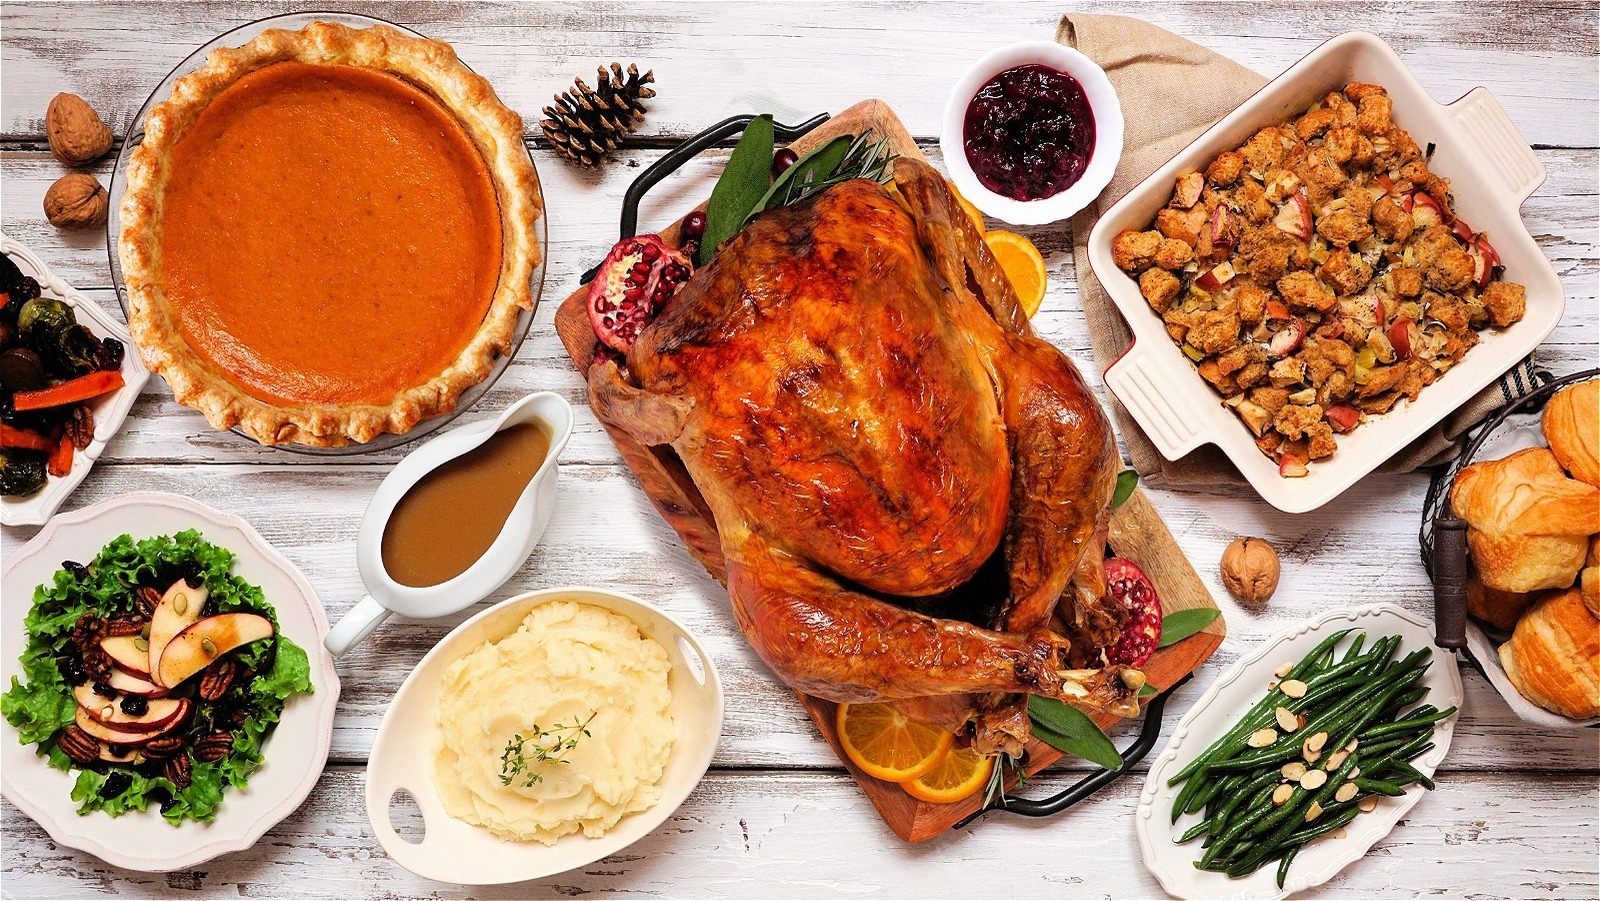 The True Hero Of Your Thanksgiving Dinner, According To Butterball Experts